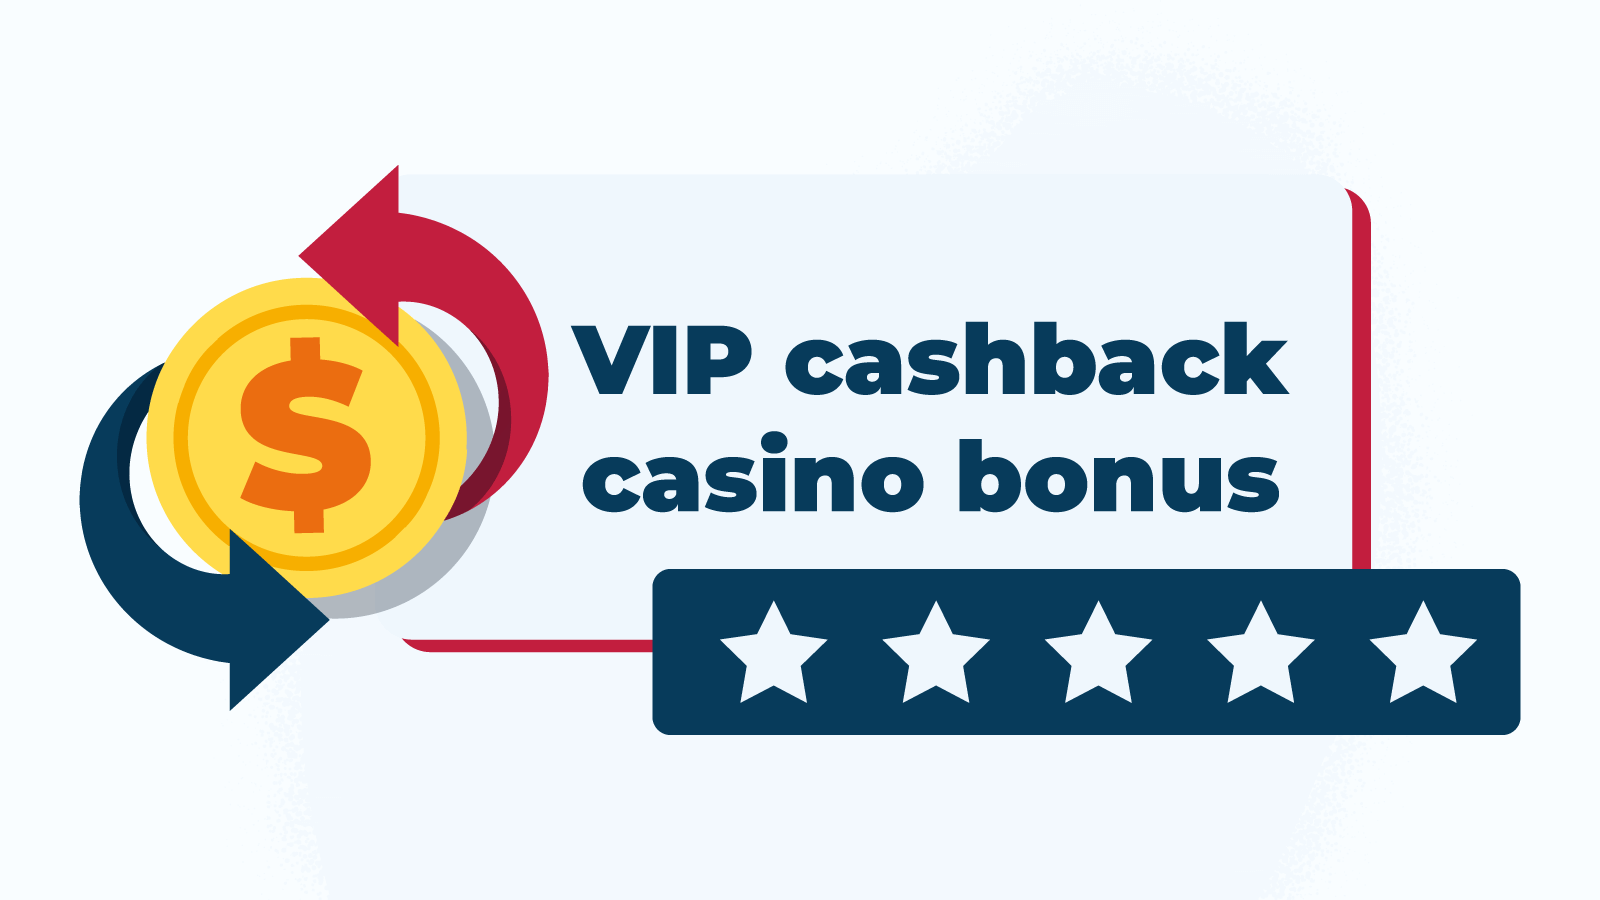 What’s special about the VIP cashback casino bonus